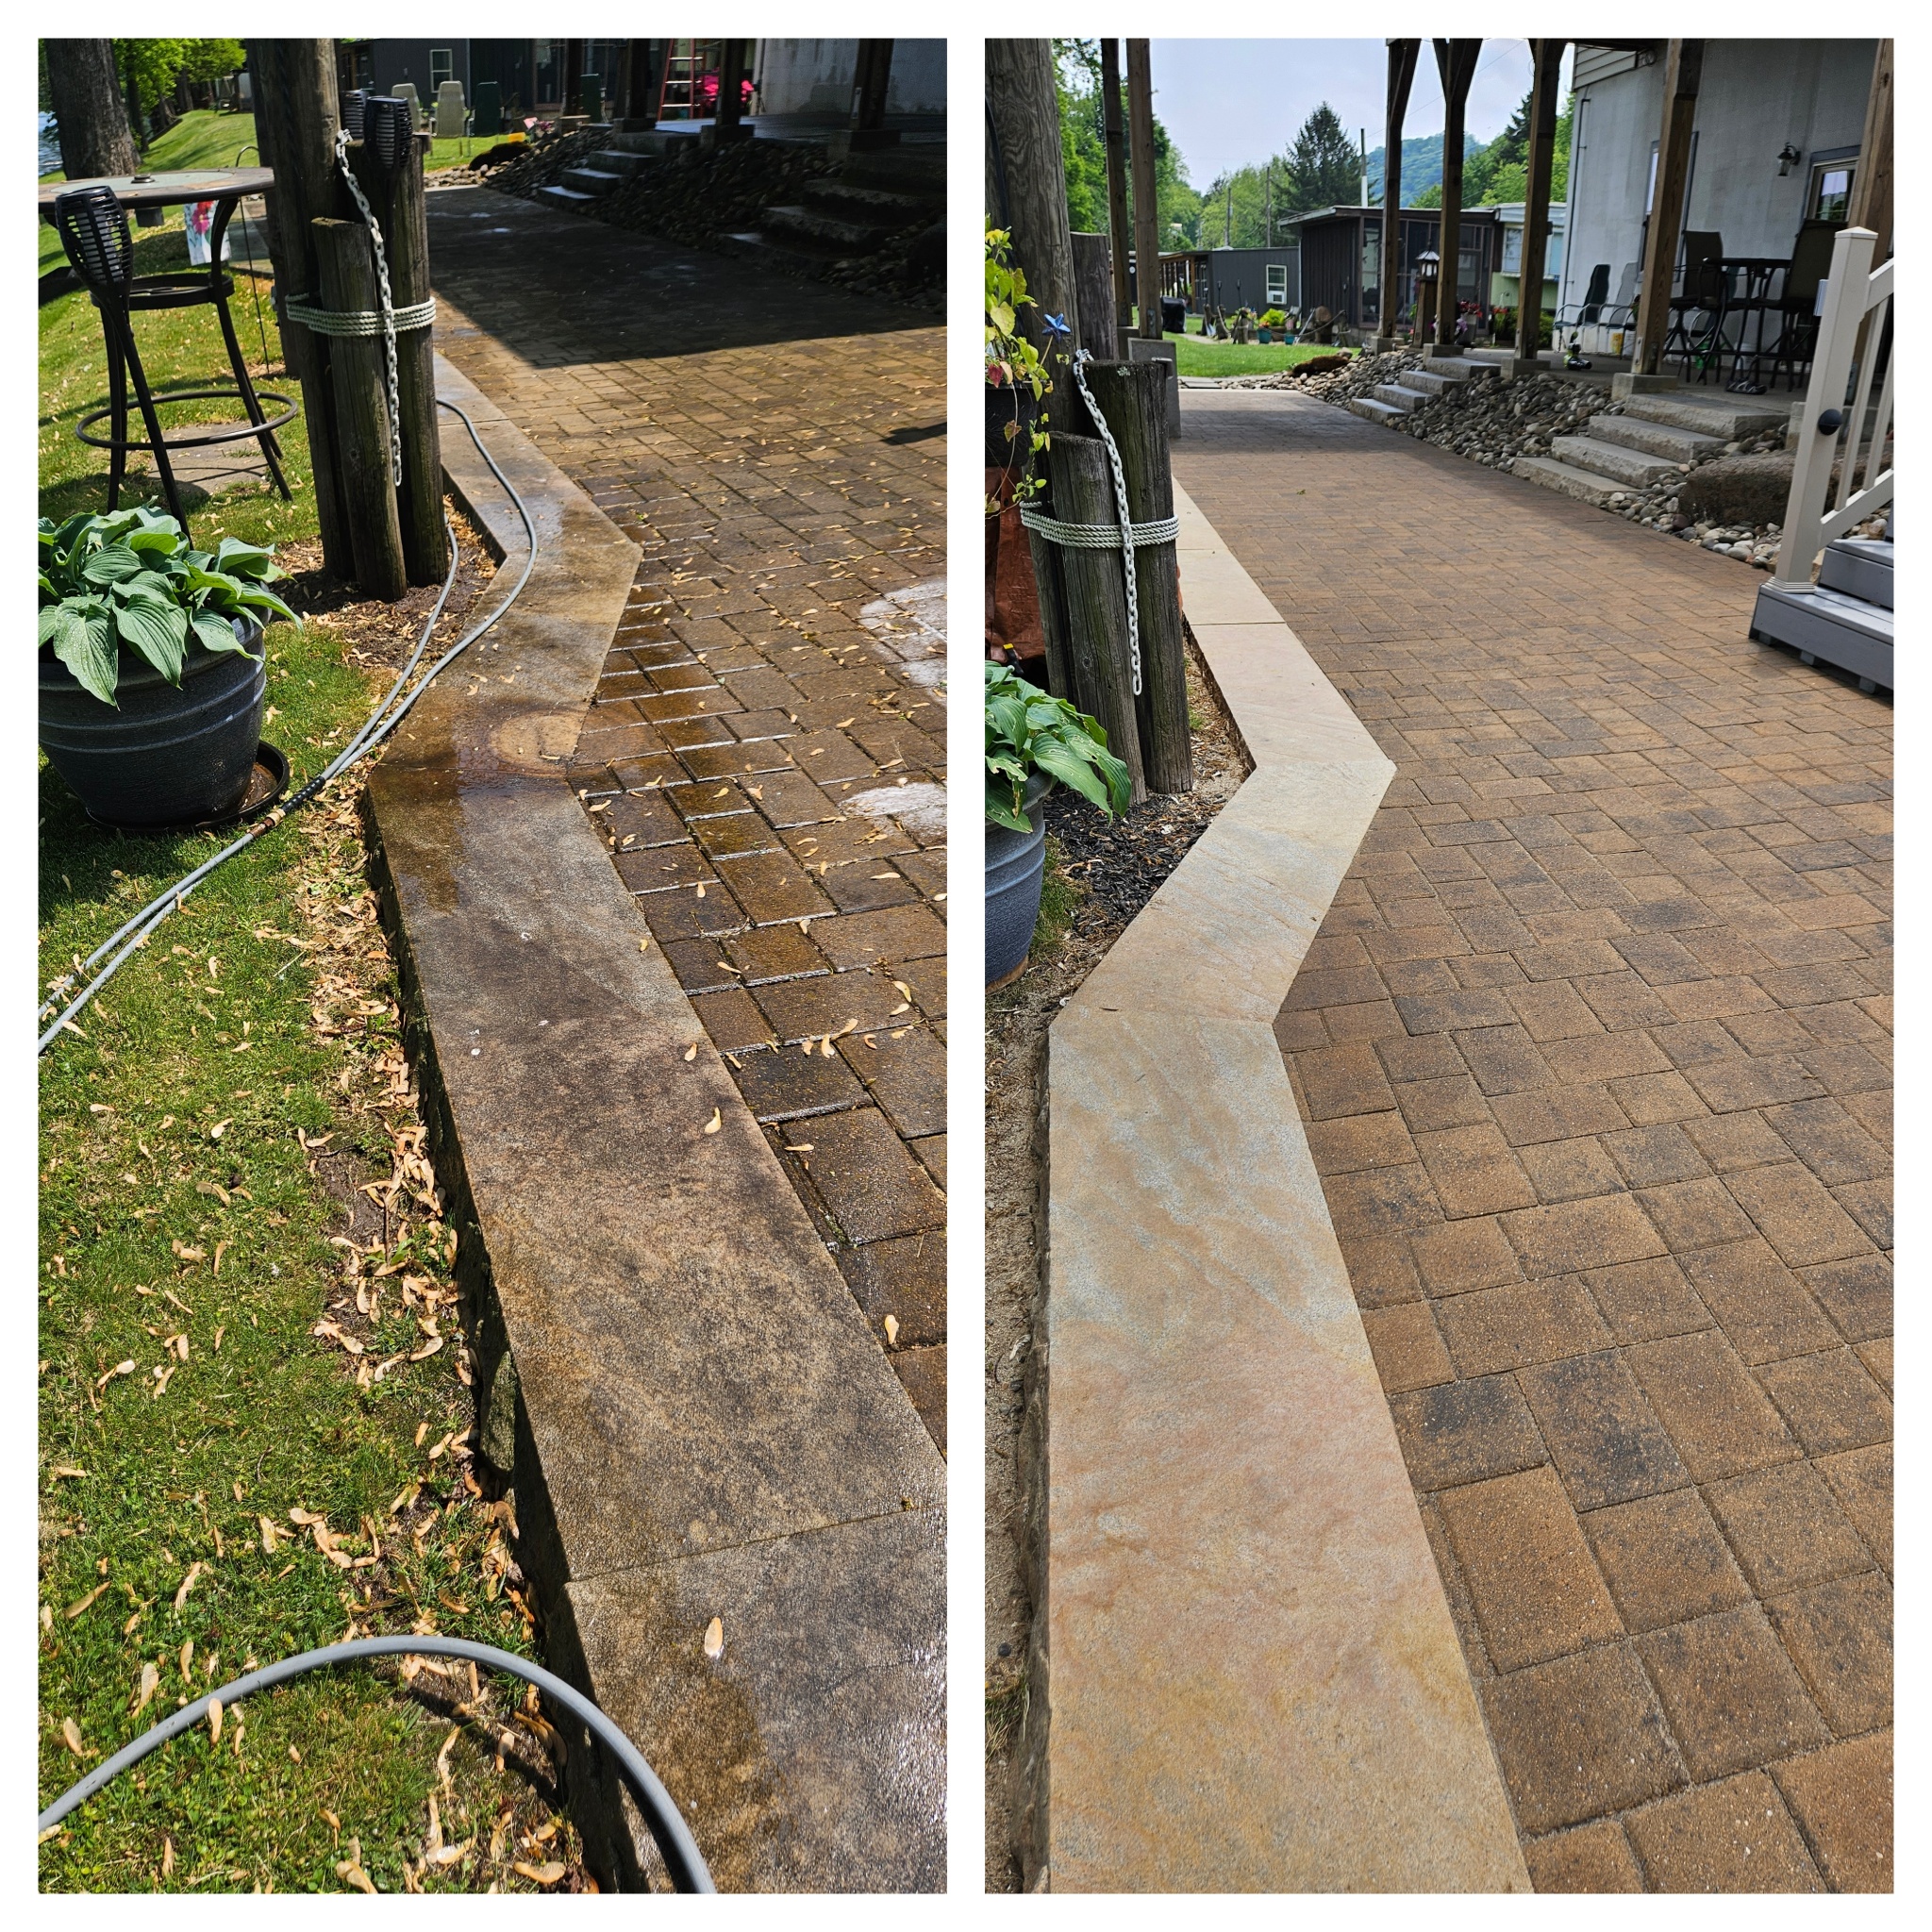 Top Quality House Washing, Pressure Washing and Paver Restoration Performed in Selinsgrove, Pennsylvania!